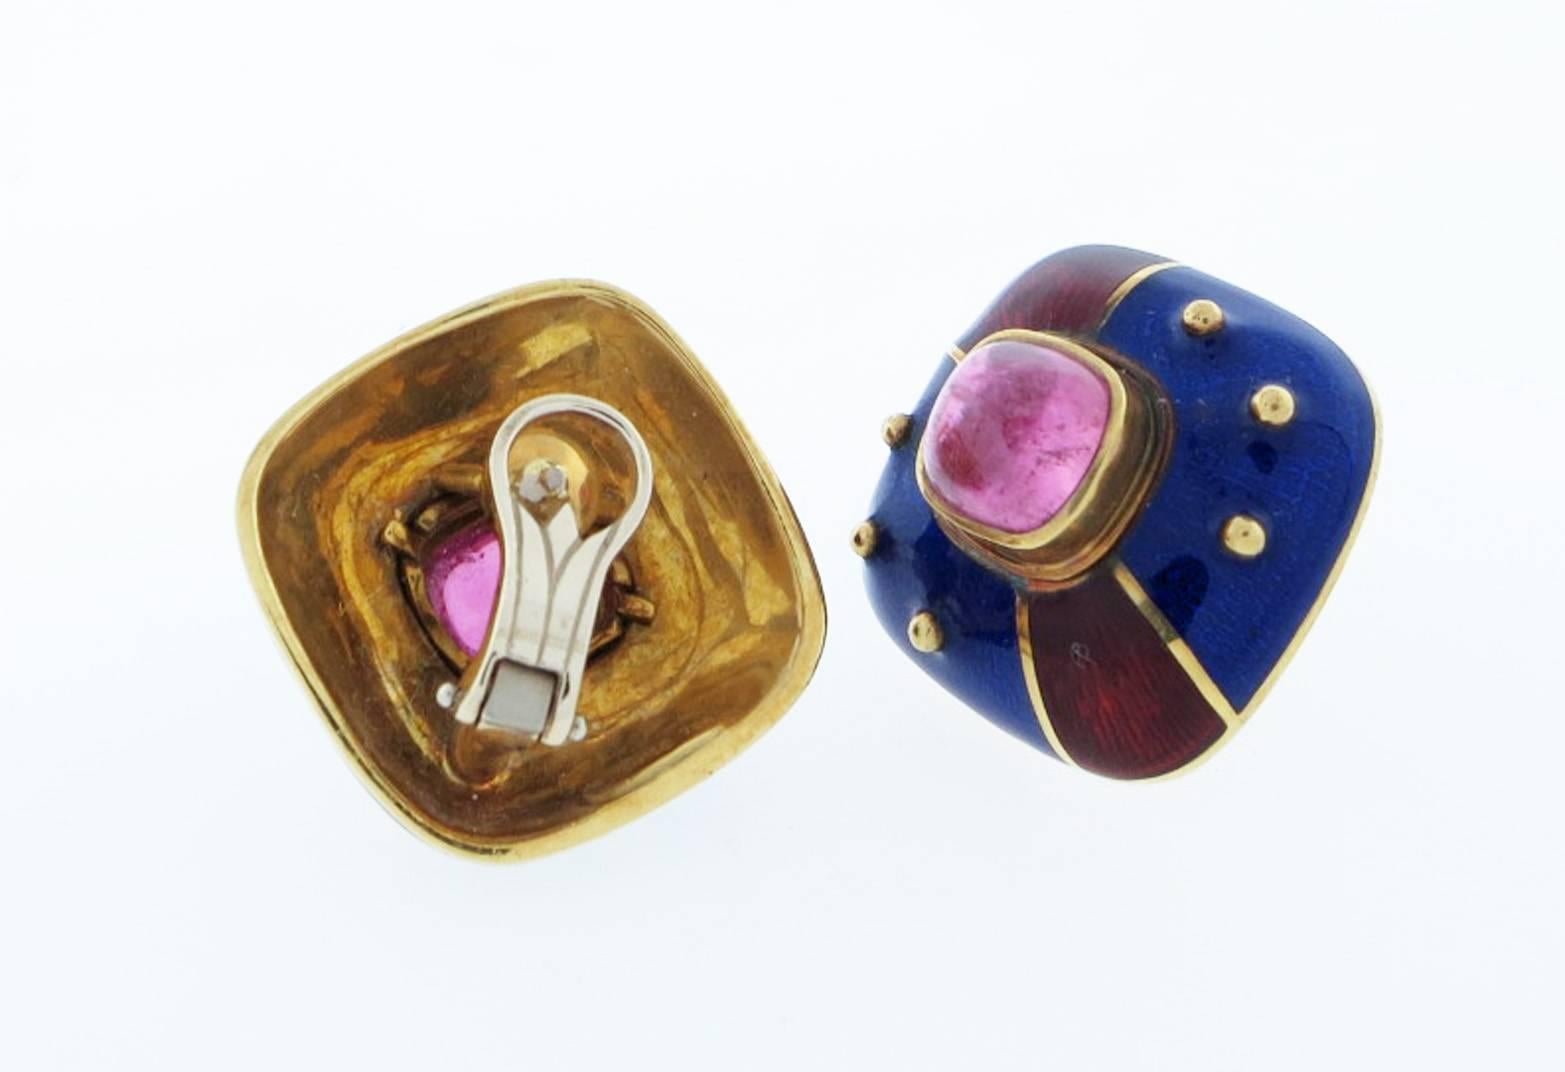 18kt. yellow gold pillow shape earrings made by Mavito. Each clip earring measures approx. .75 inches and is enameled in vibrant blue and red with a cabochon pink tourmaline center. Posts can be added.